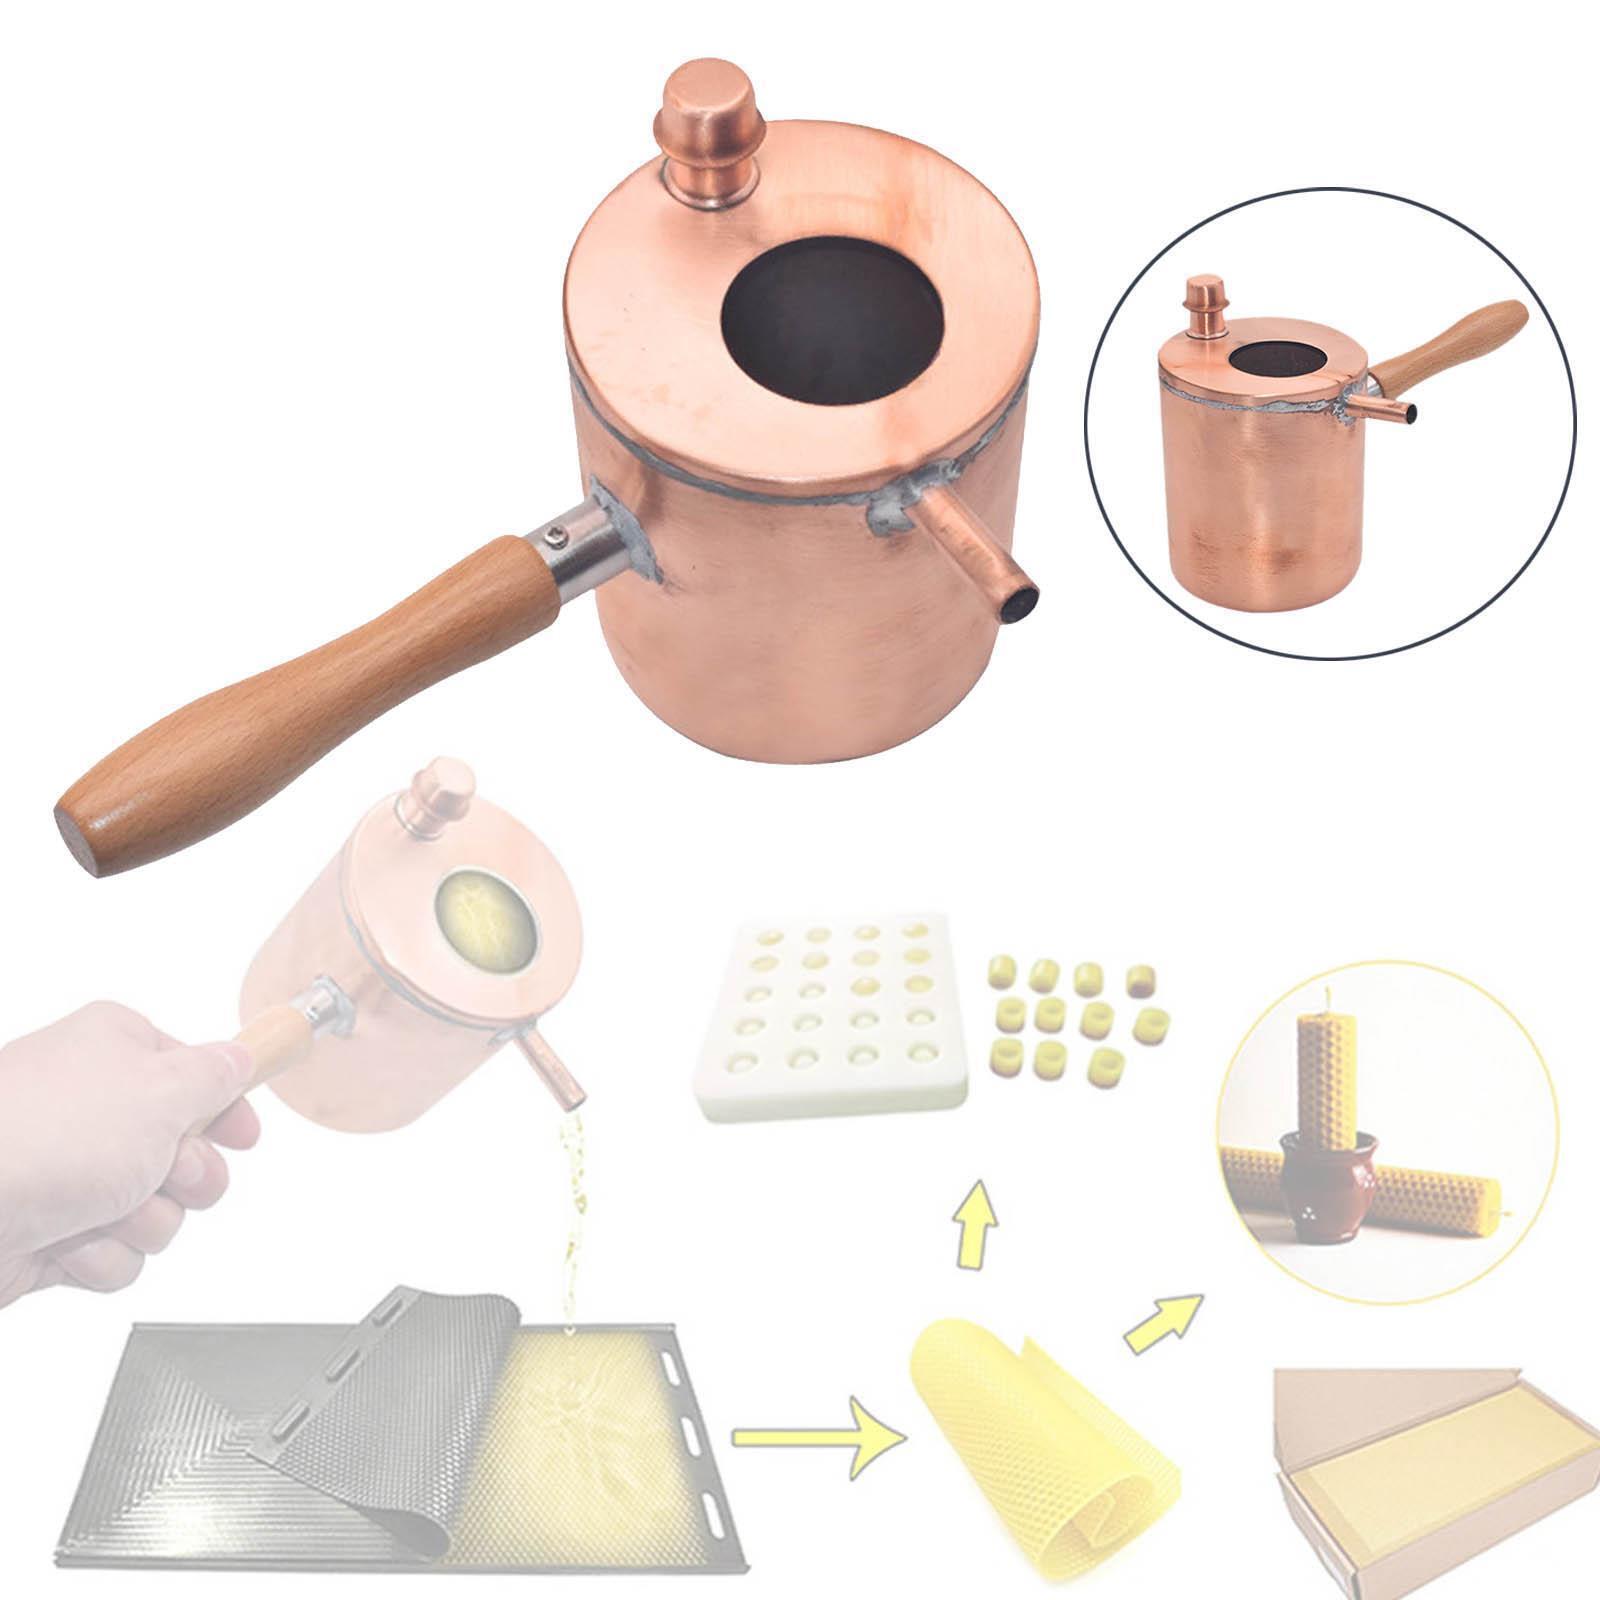 Beeswax Melting Pot Wooden Handle Boiling Melter Tools Storage Diy For Home